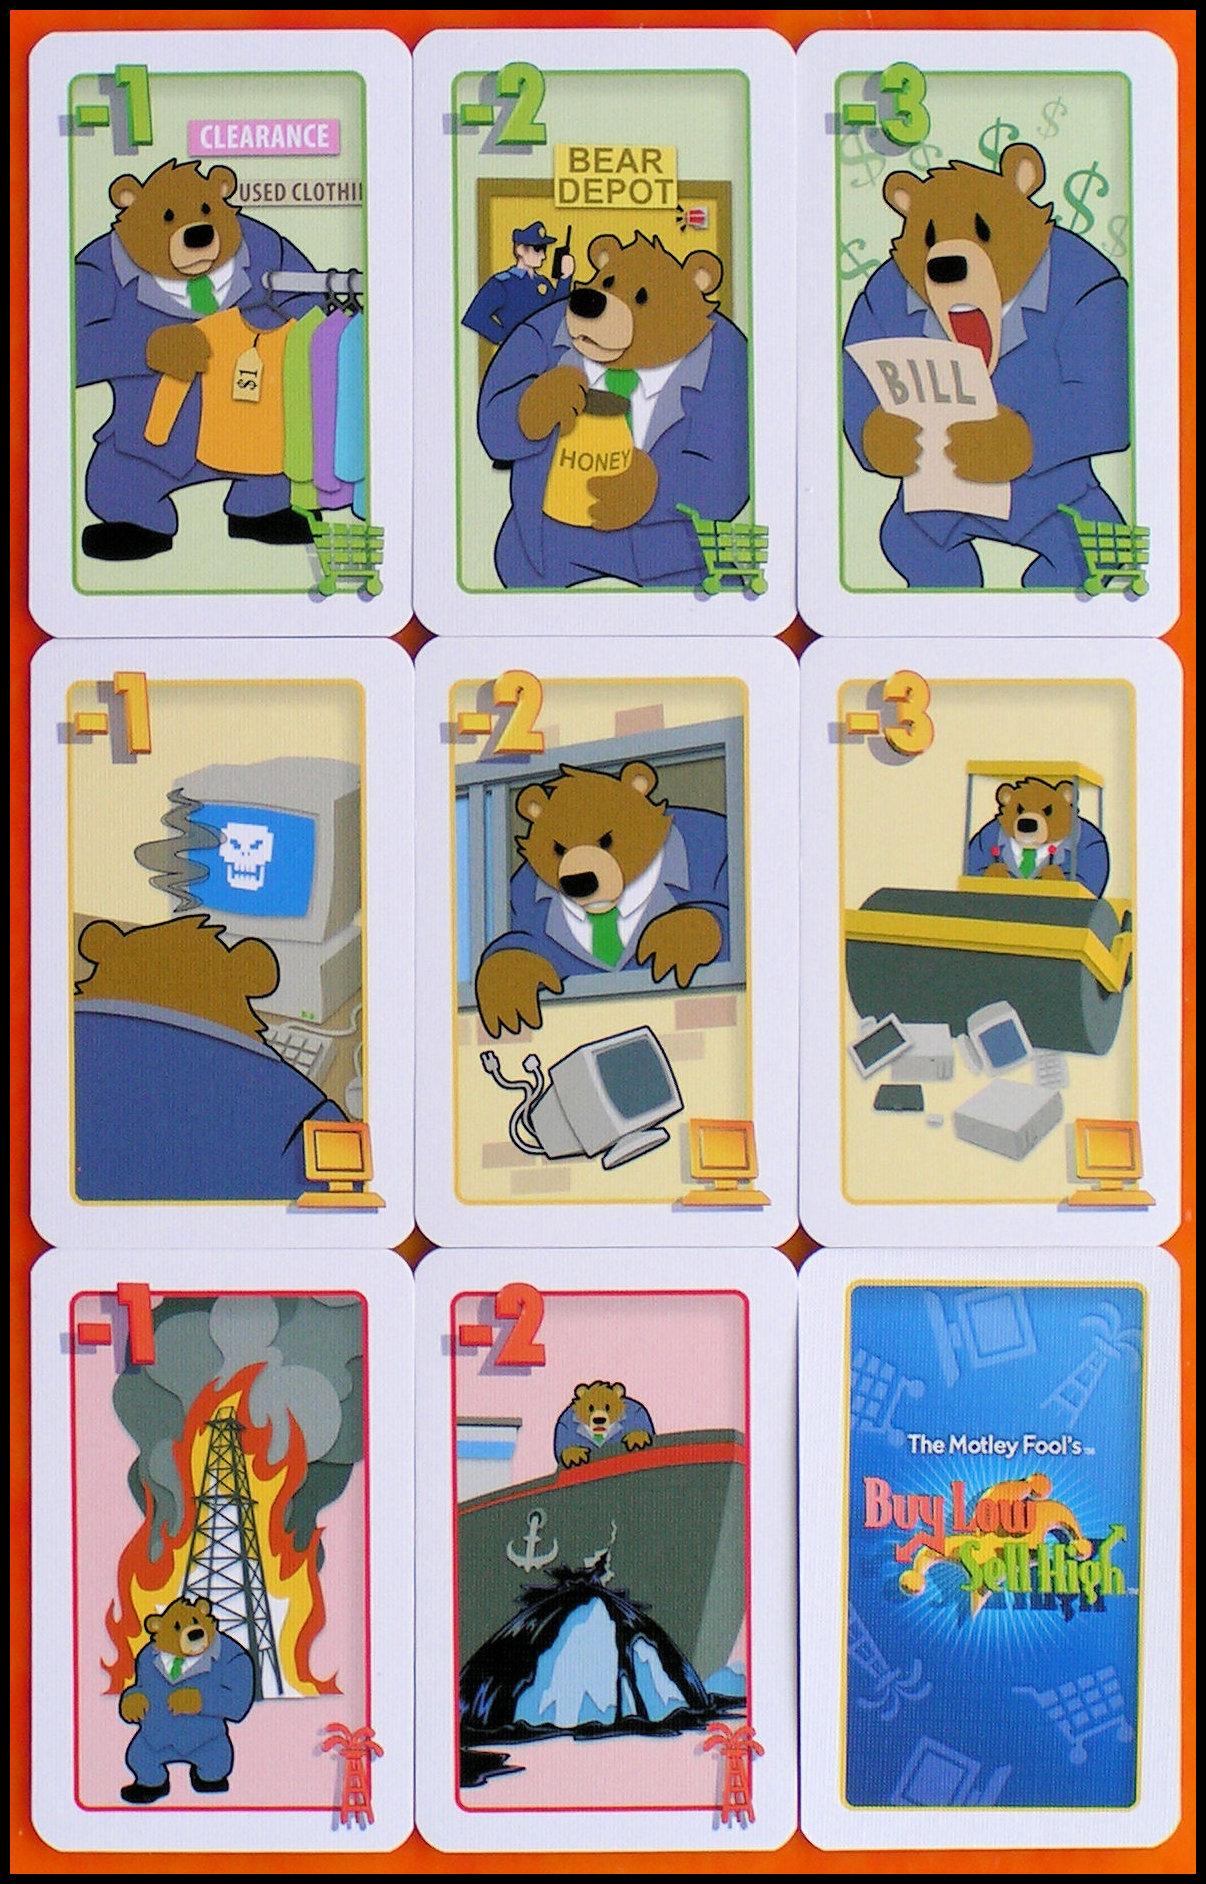 Buy Low, Sell High - Bear Market Cards